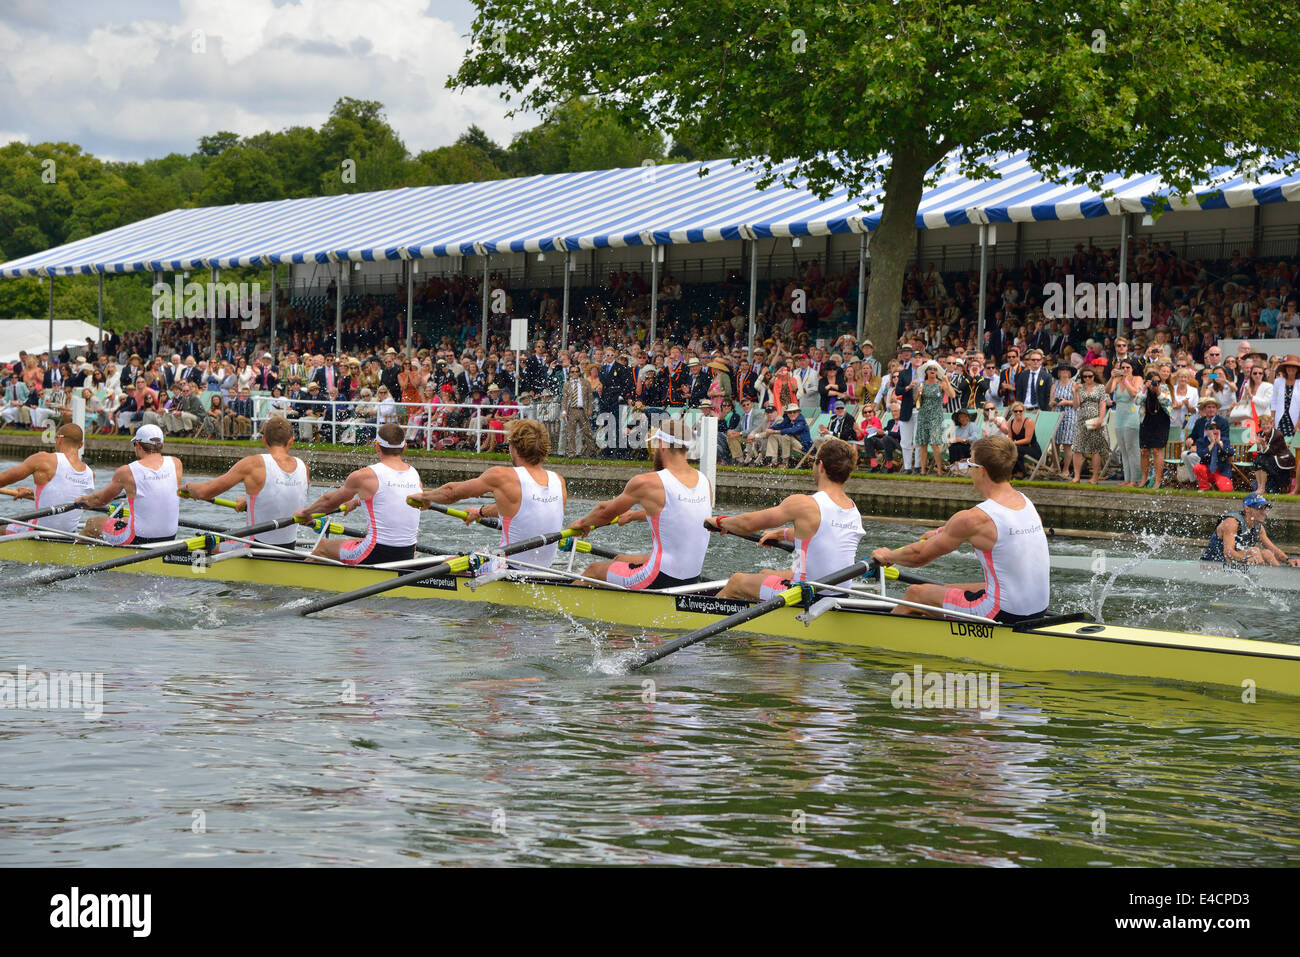 Leander Club taking part in the Ladies' Challenge Plate at the Henley Royal Regatta 2014,Henley-on-Thames,Oxfordshire,England,UK Stock Photo